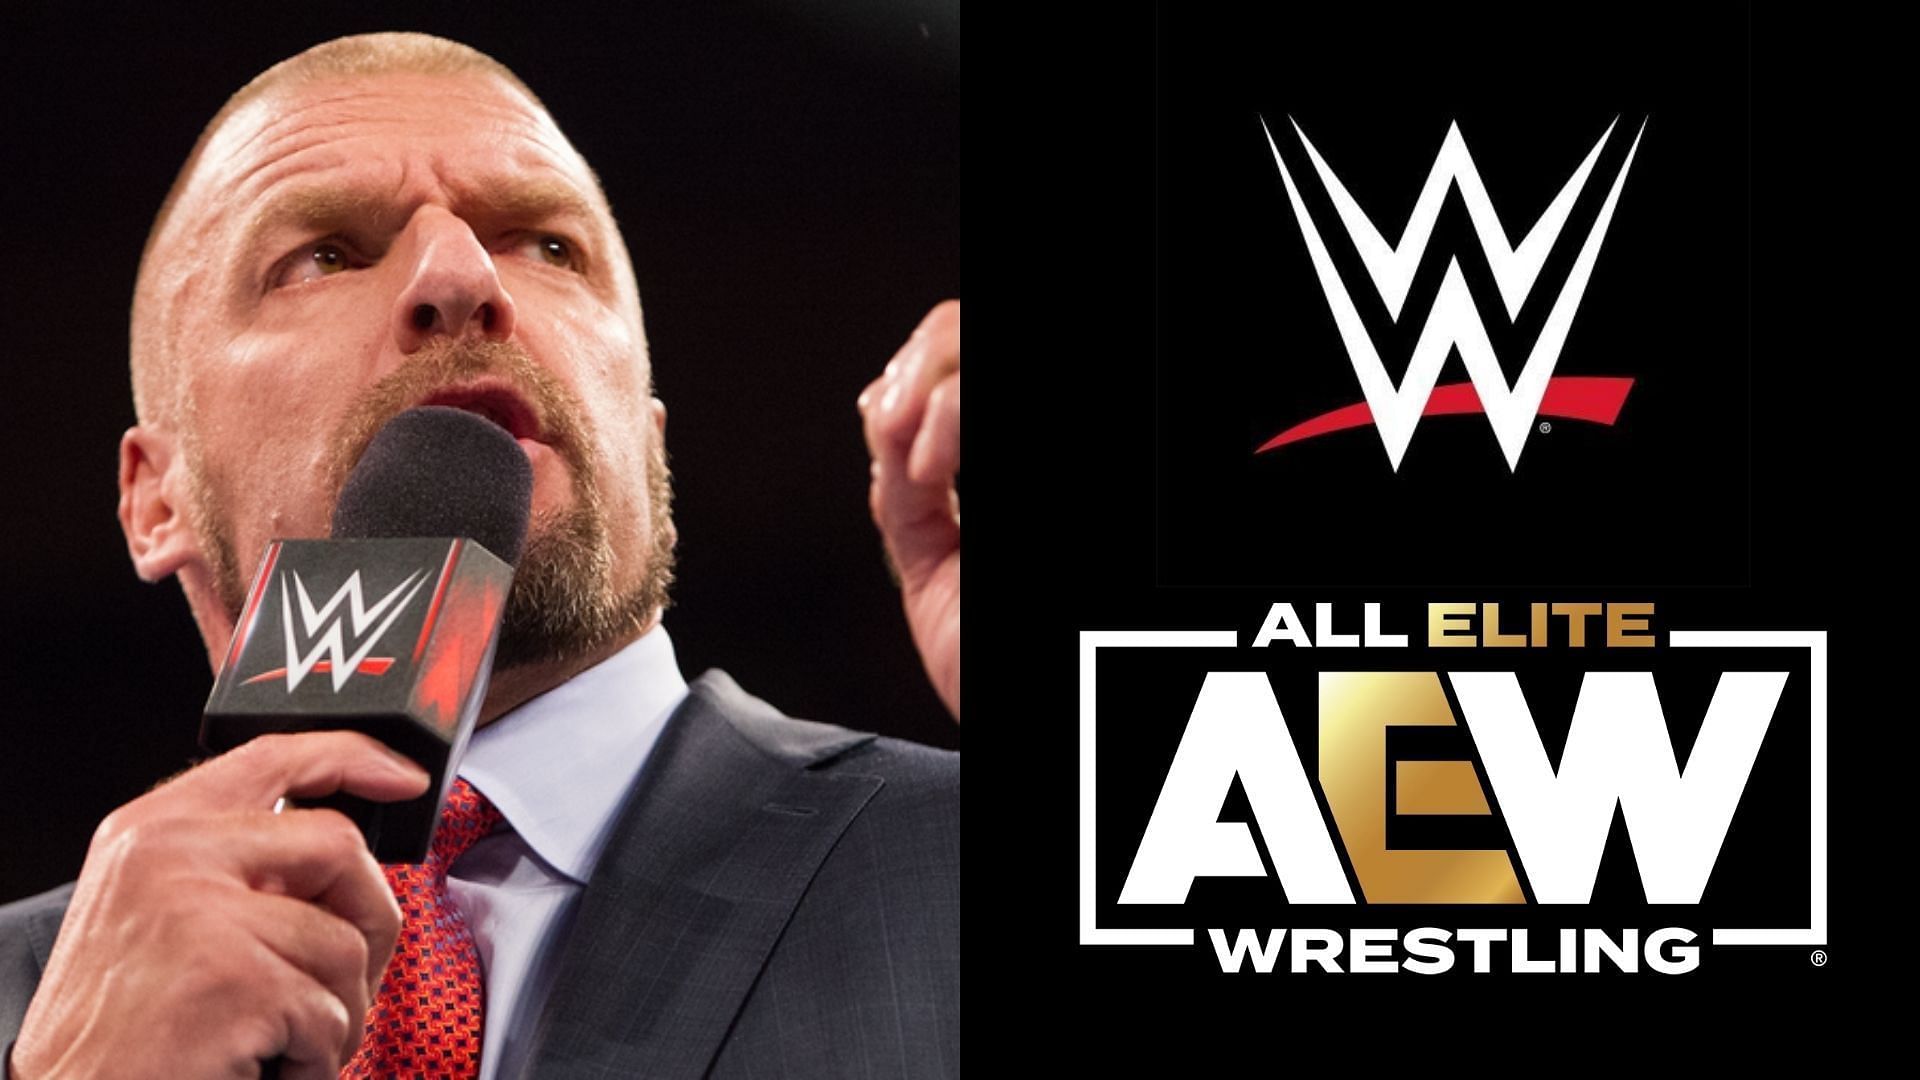 Triple H is the Chief Content Officer of WWE [Photo courtesy of WWE and AEW